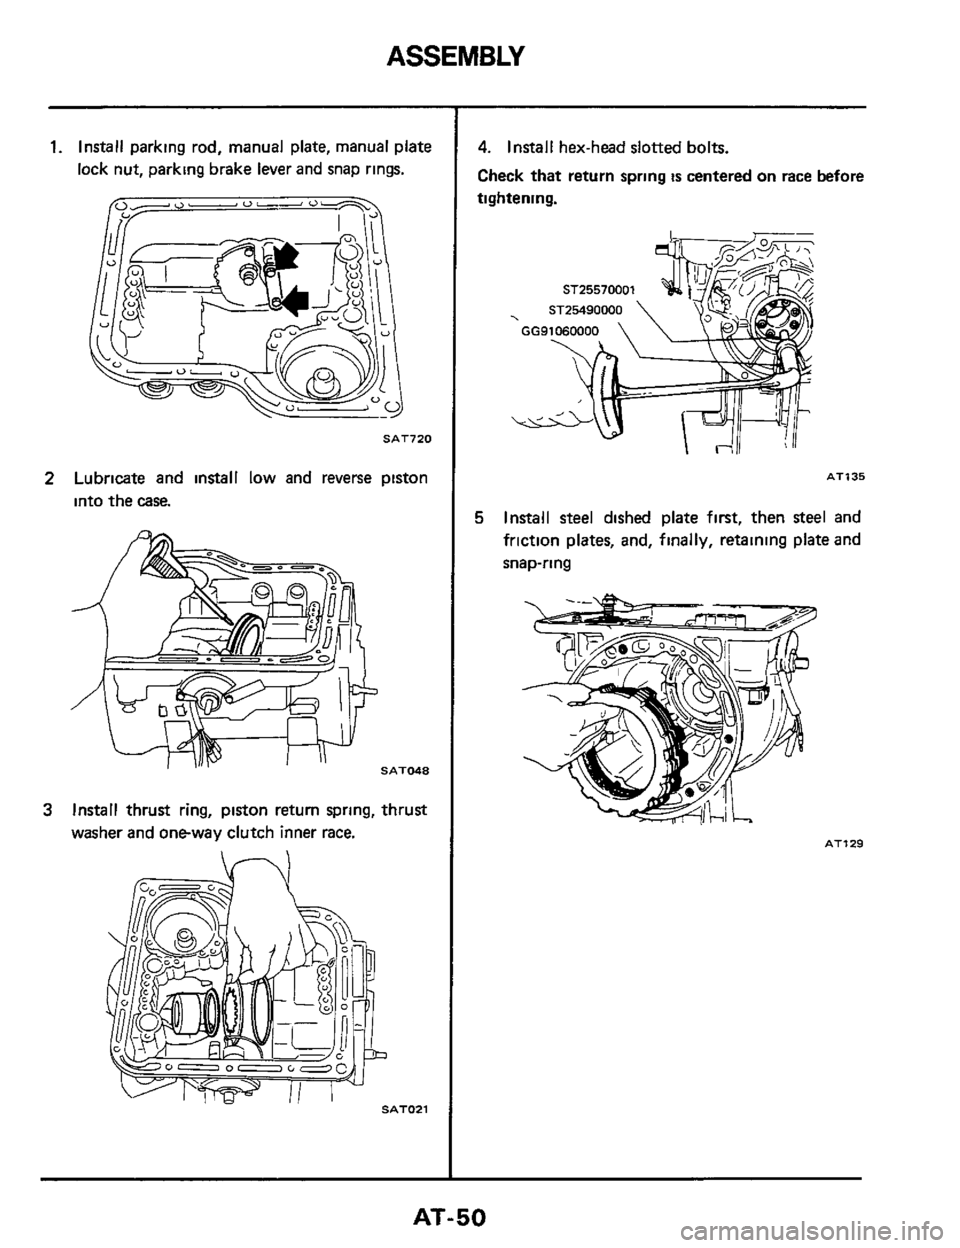 NISSAN 300ZX 1984 Z31 Automatic Transmission Workshop Manual ASSEMBLY 
1. Install parking  rod, manual  plate, manual  plate 
lock  nut, parking brake  lever and snap rings. 
Ob/-- 0 - 0- 7 
SAT720 
2 Lubricate  and install  low  and reverse  piston 
into the c